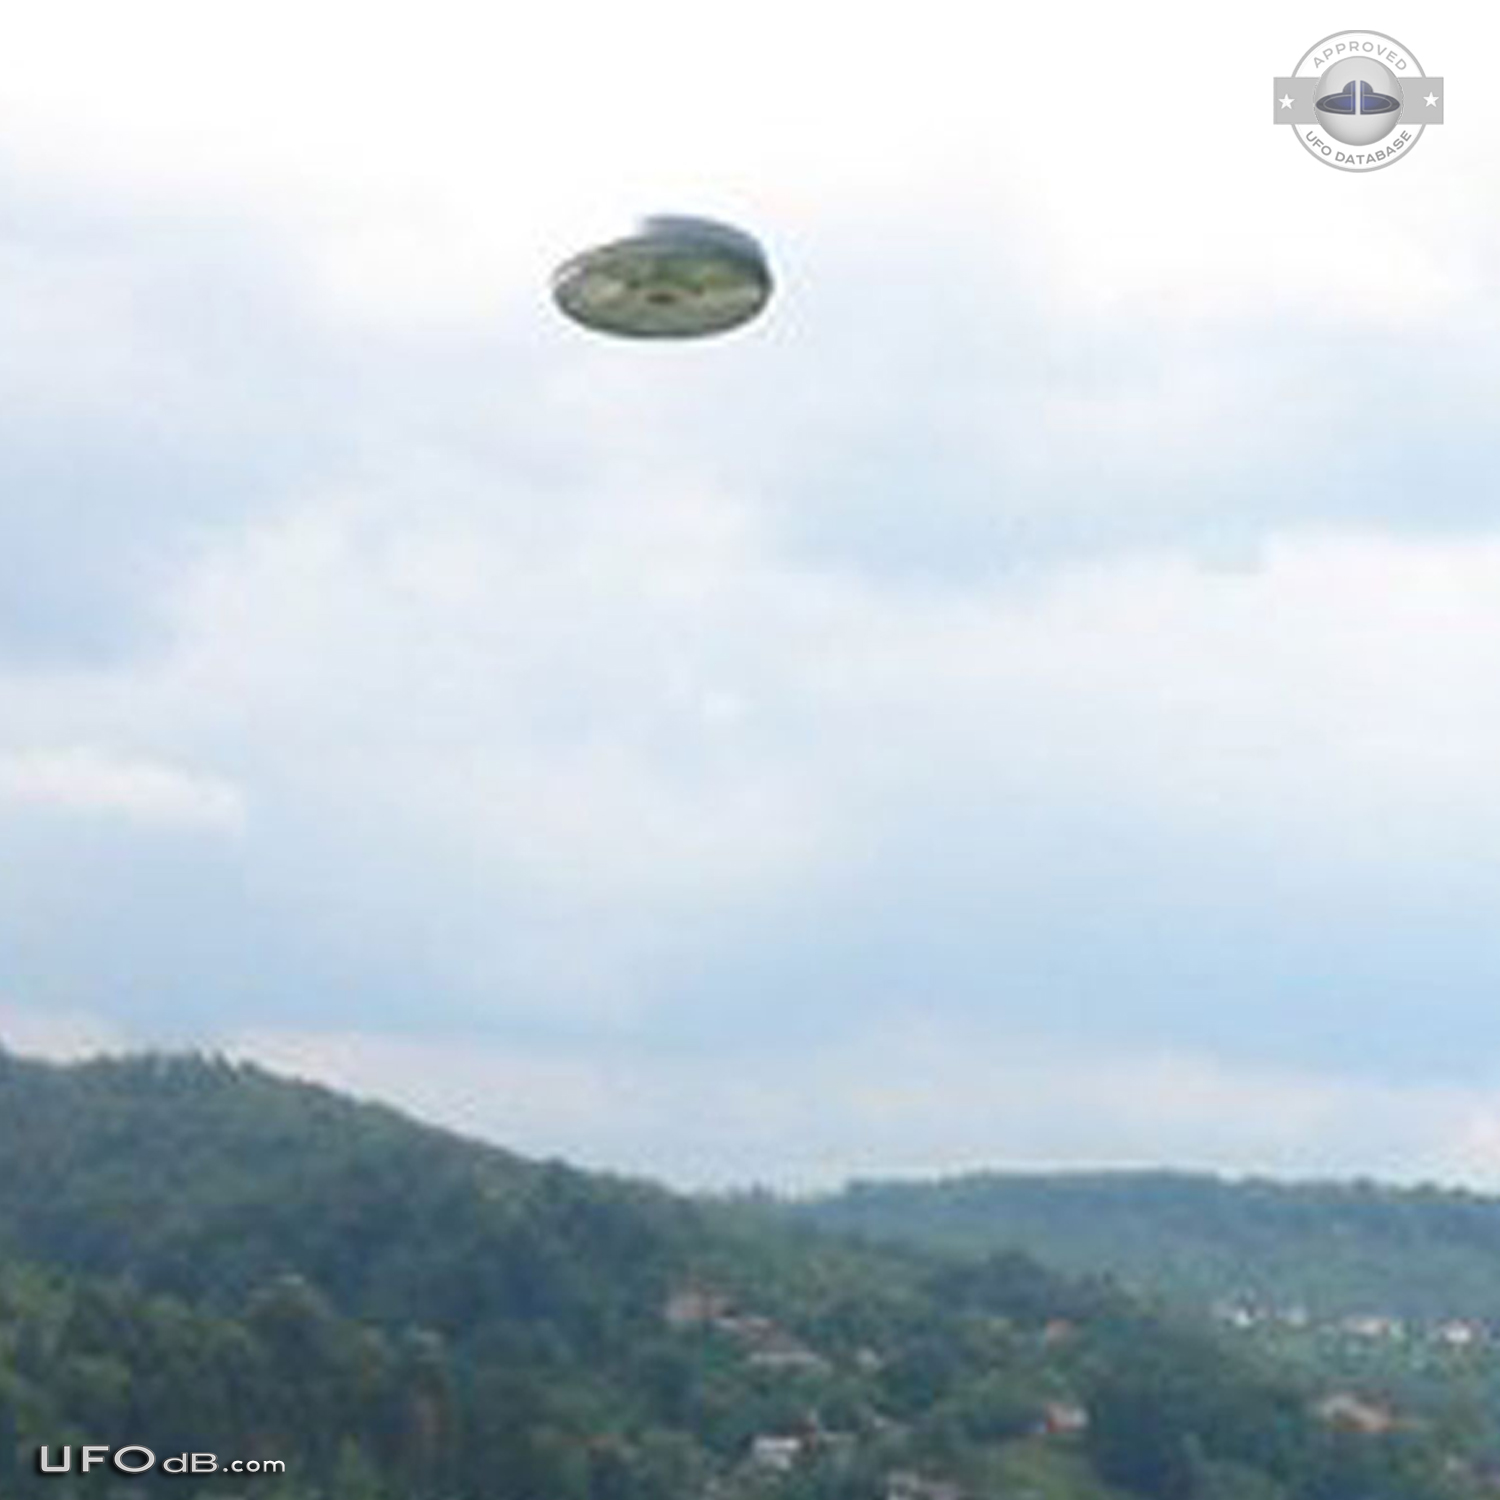 Cylinder UFO appear with a Flash but caught on picture - Tuzla Bosnia UFO Picture #532-3